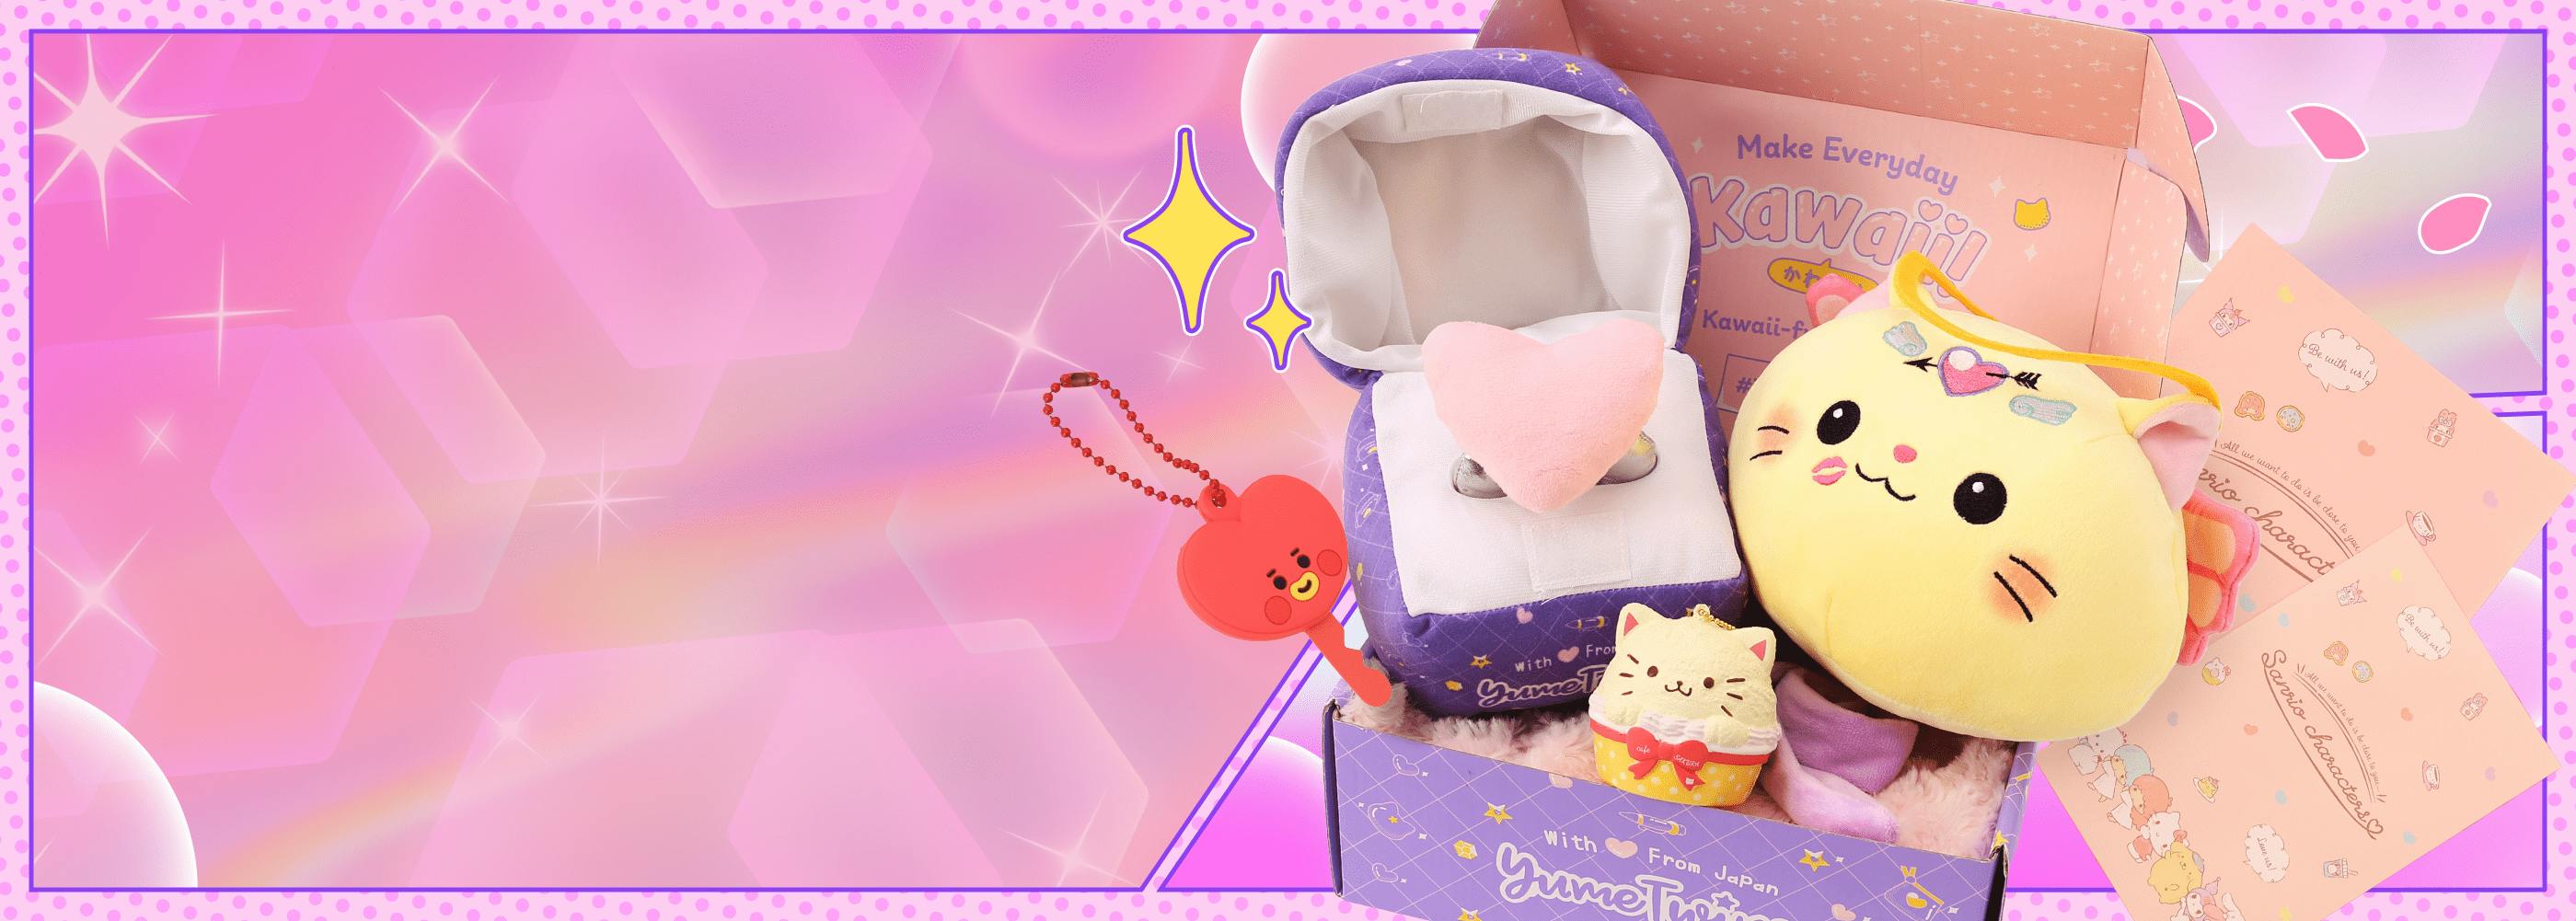 Sign up by February 15th and get kawaii Valentine’s Day goods with Sanrio, BT21, and more straight from Japan in our Valentine's Love Story box! 